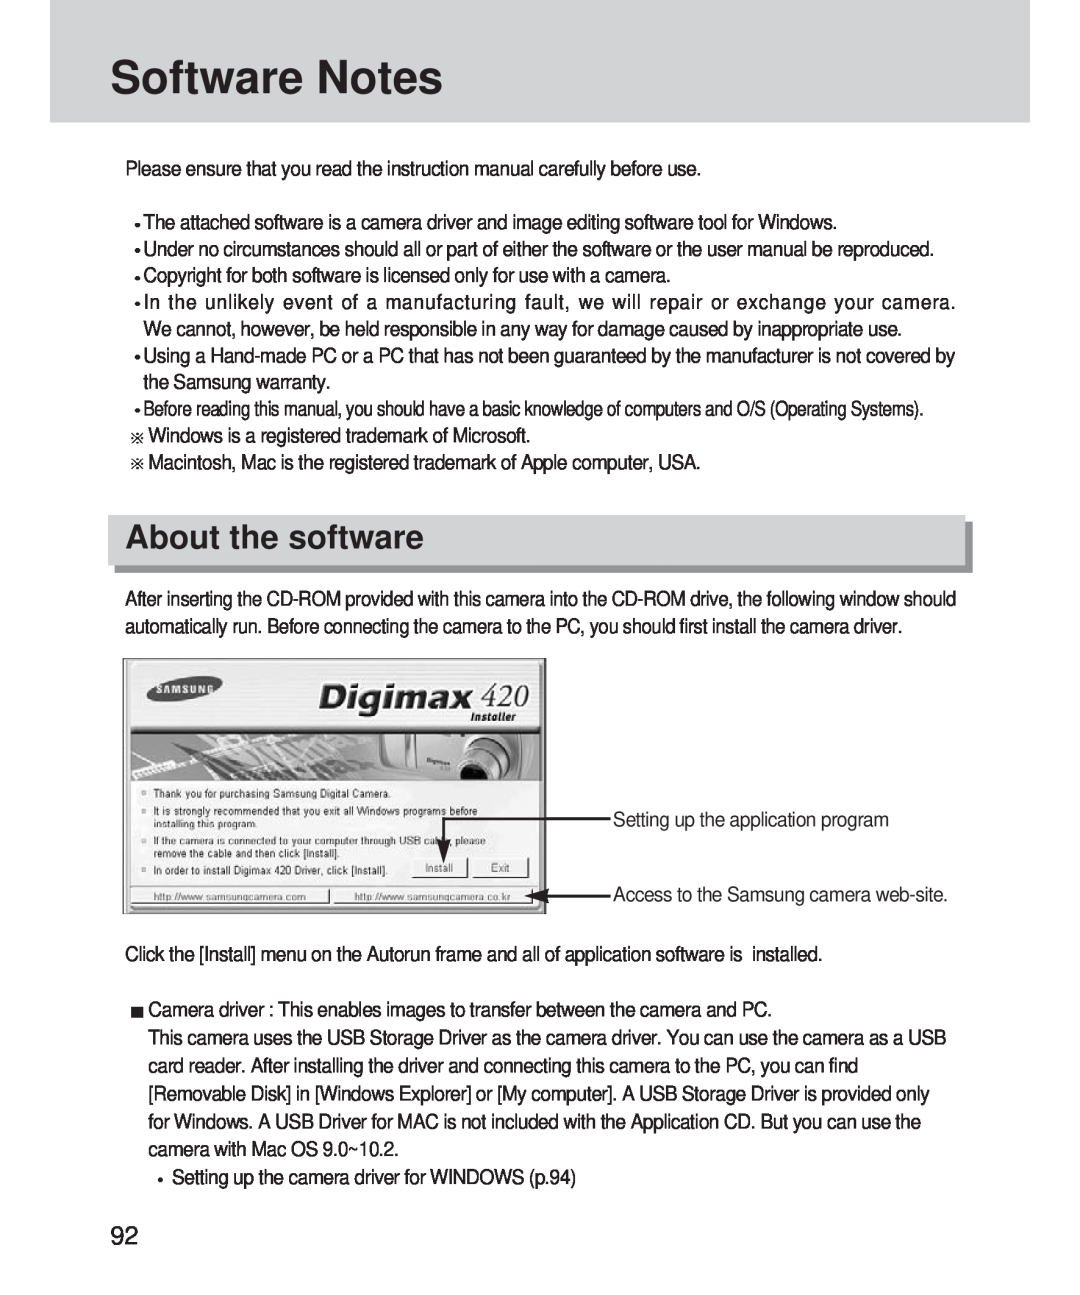 Samsung 420 manual Software Notes, About the software 